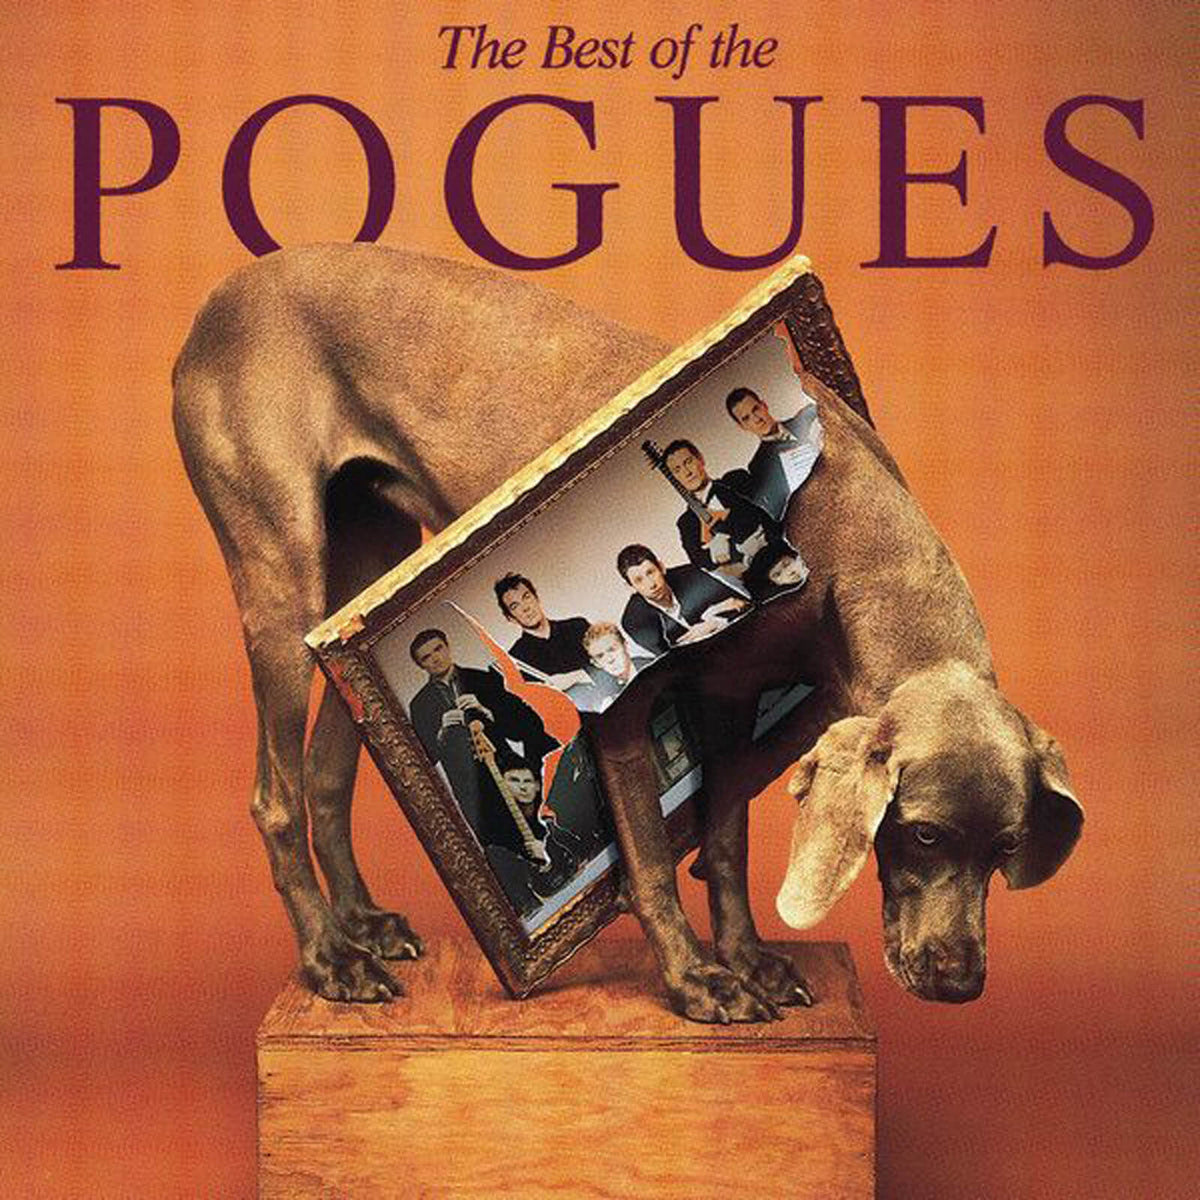 The Pogues : The Best of The Pogues